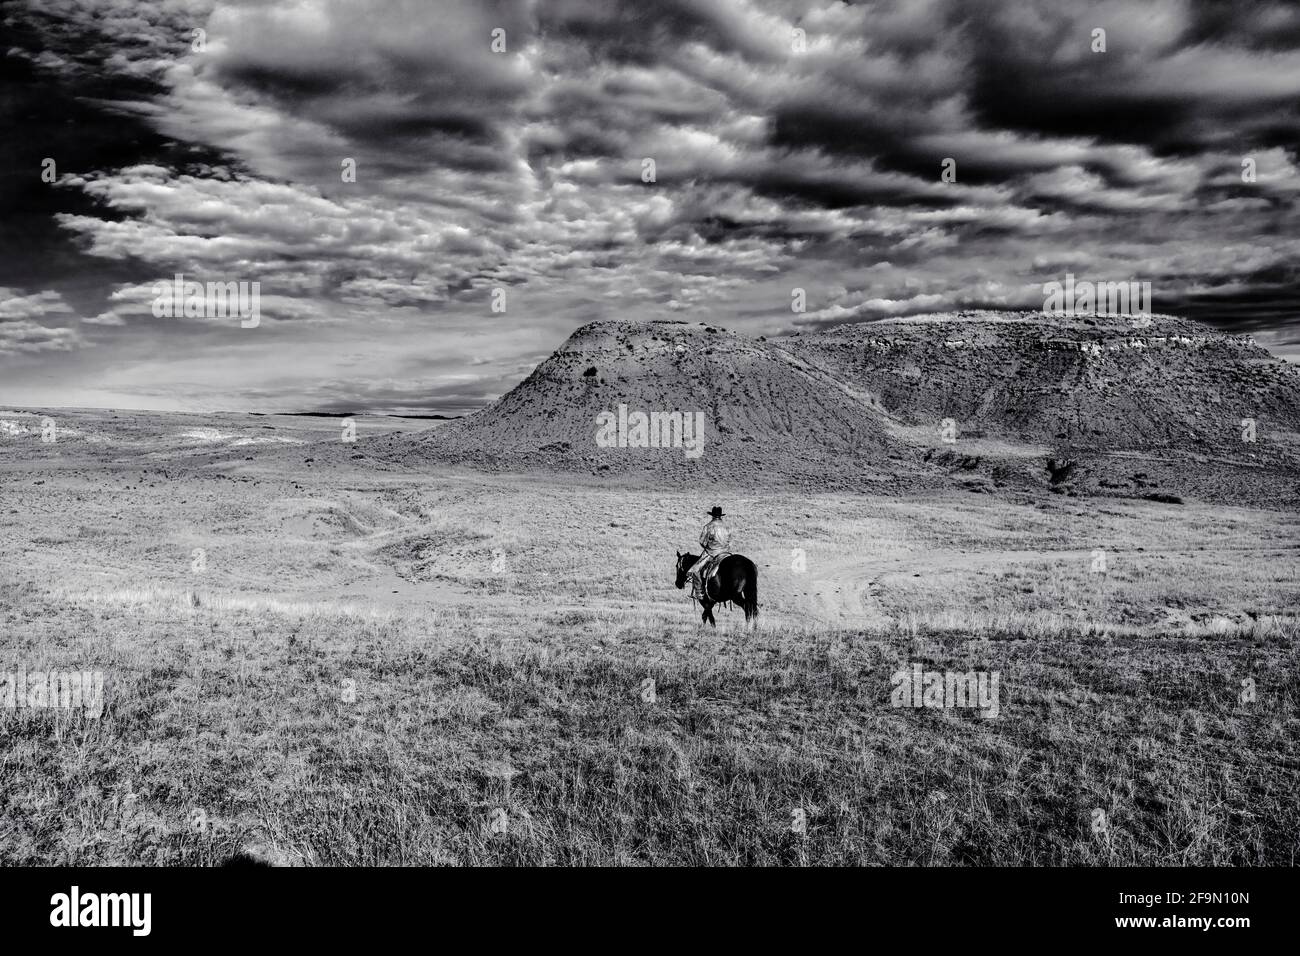 WY04146-00-BW...WYOMING - Ord Buchingham ridding the open range of the Willow Creek Ranch. MR# B20 Stock Photo